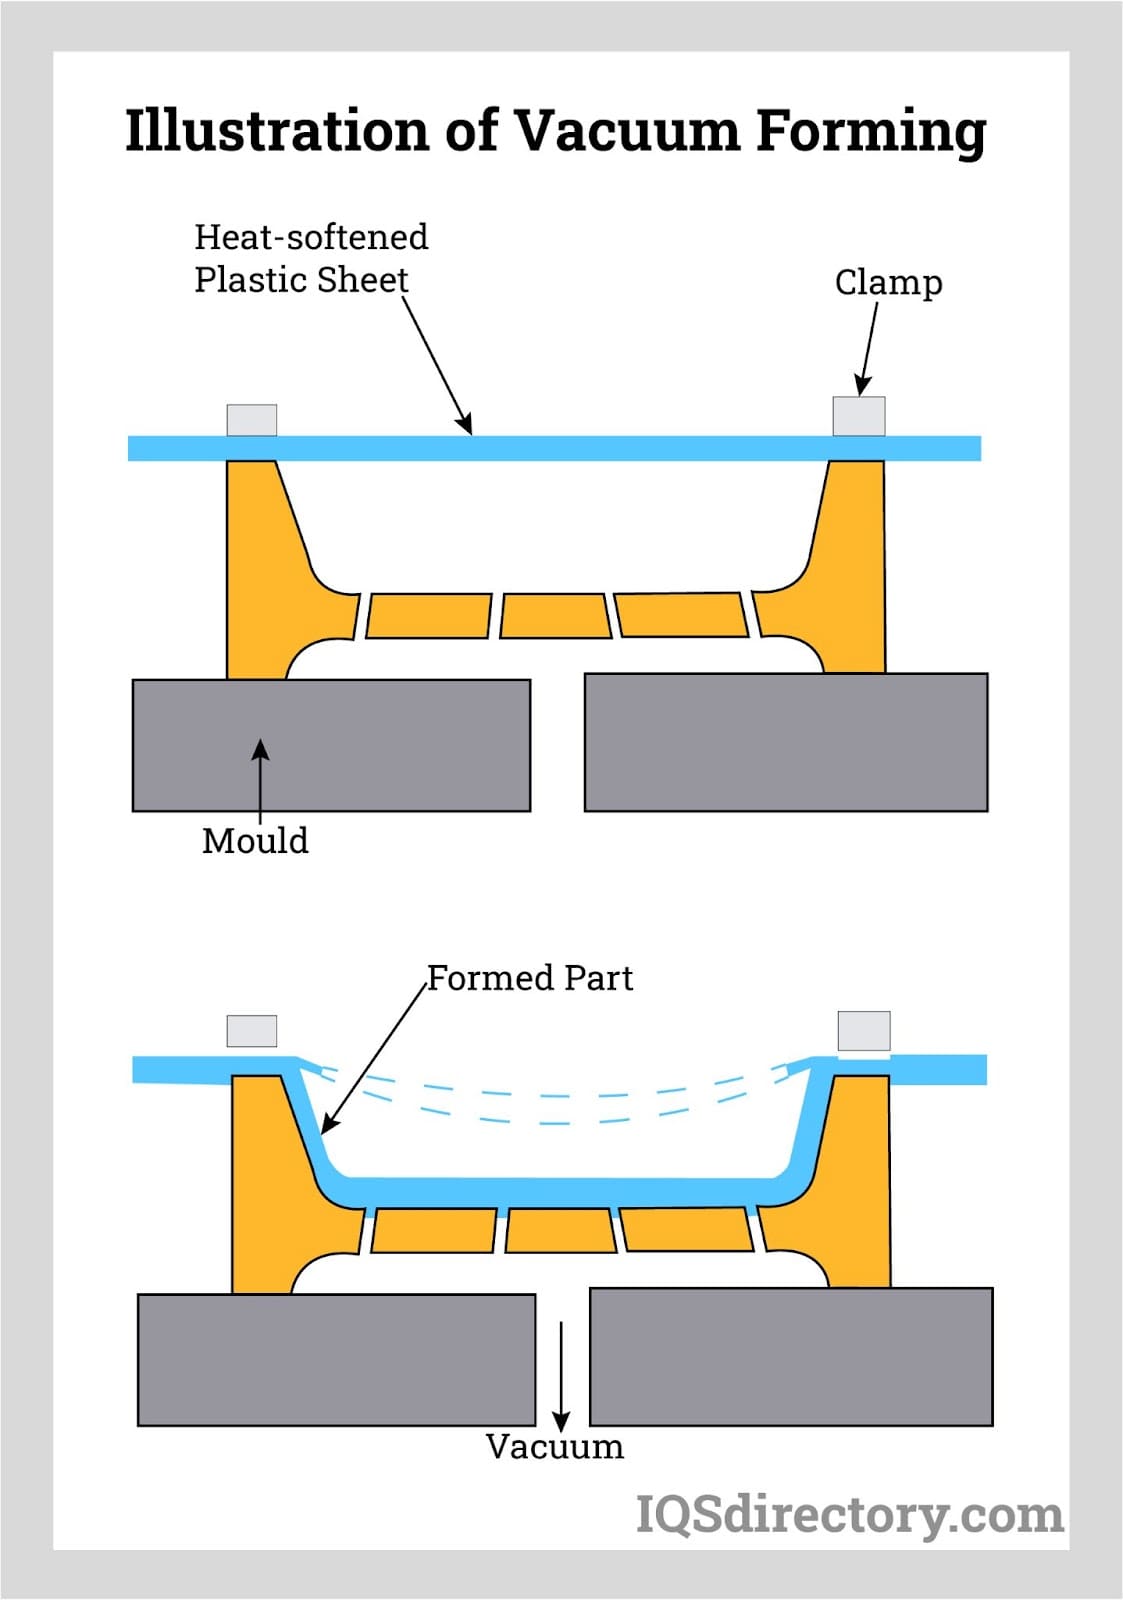 Vacuum Forming Types Uses Features And Benefits